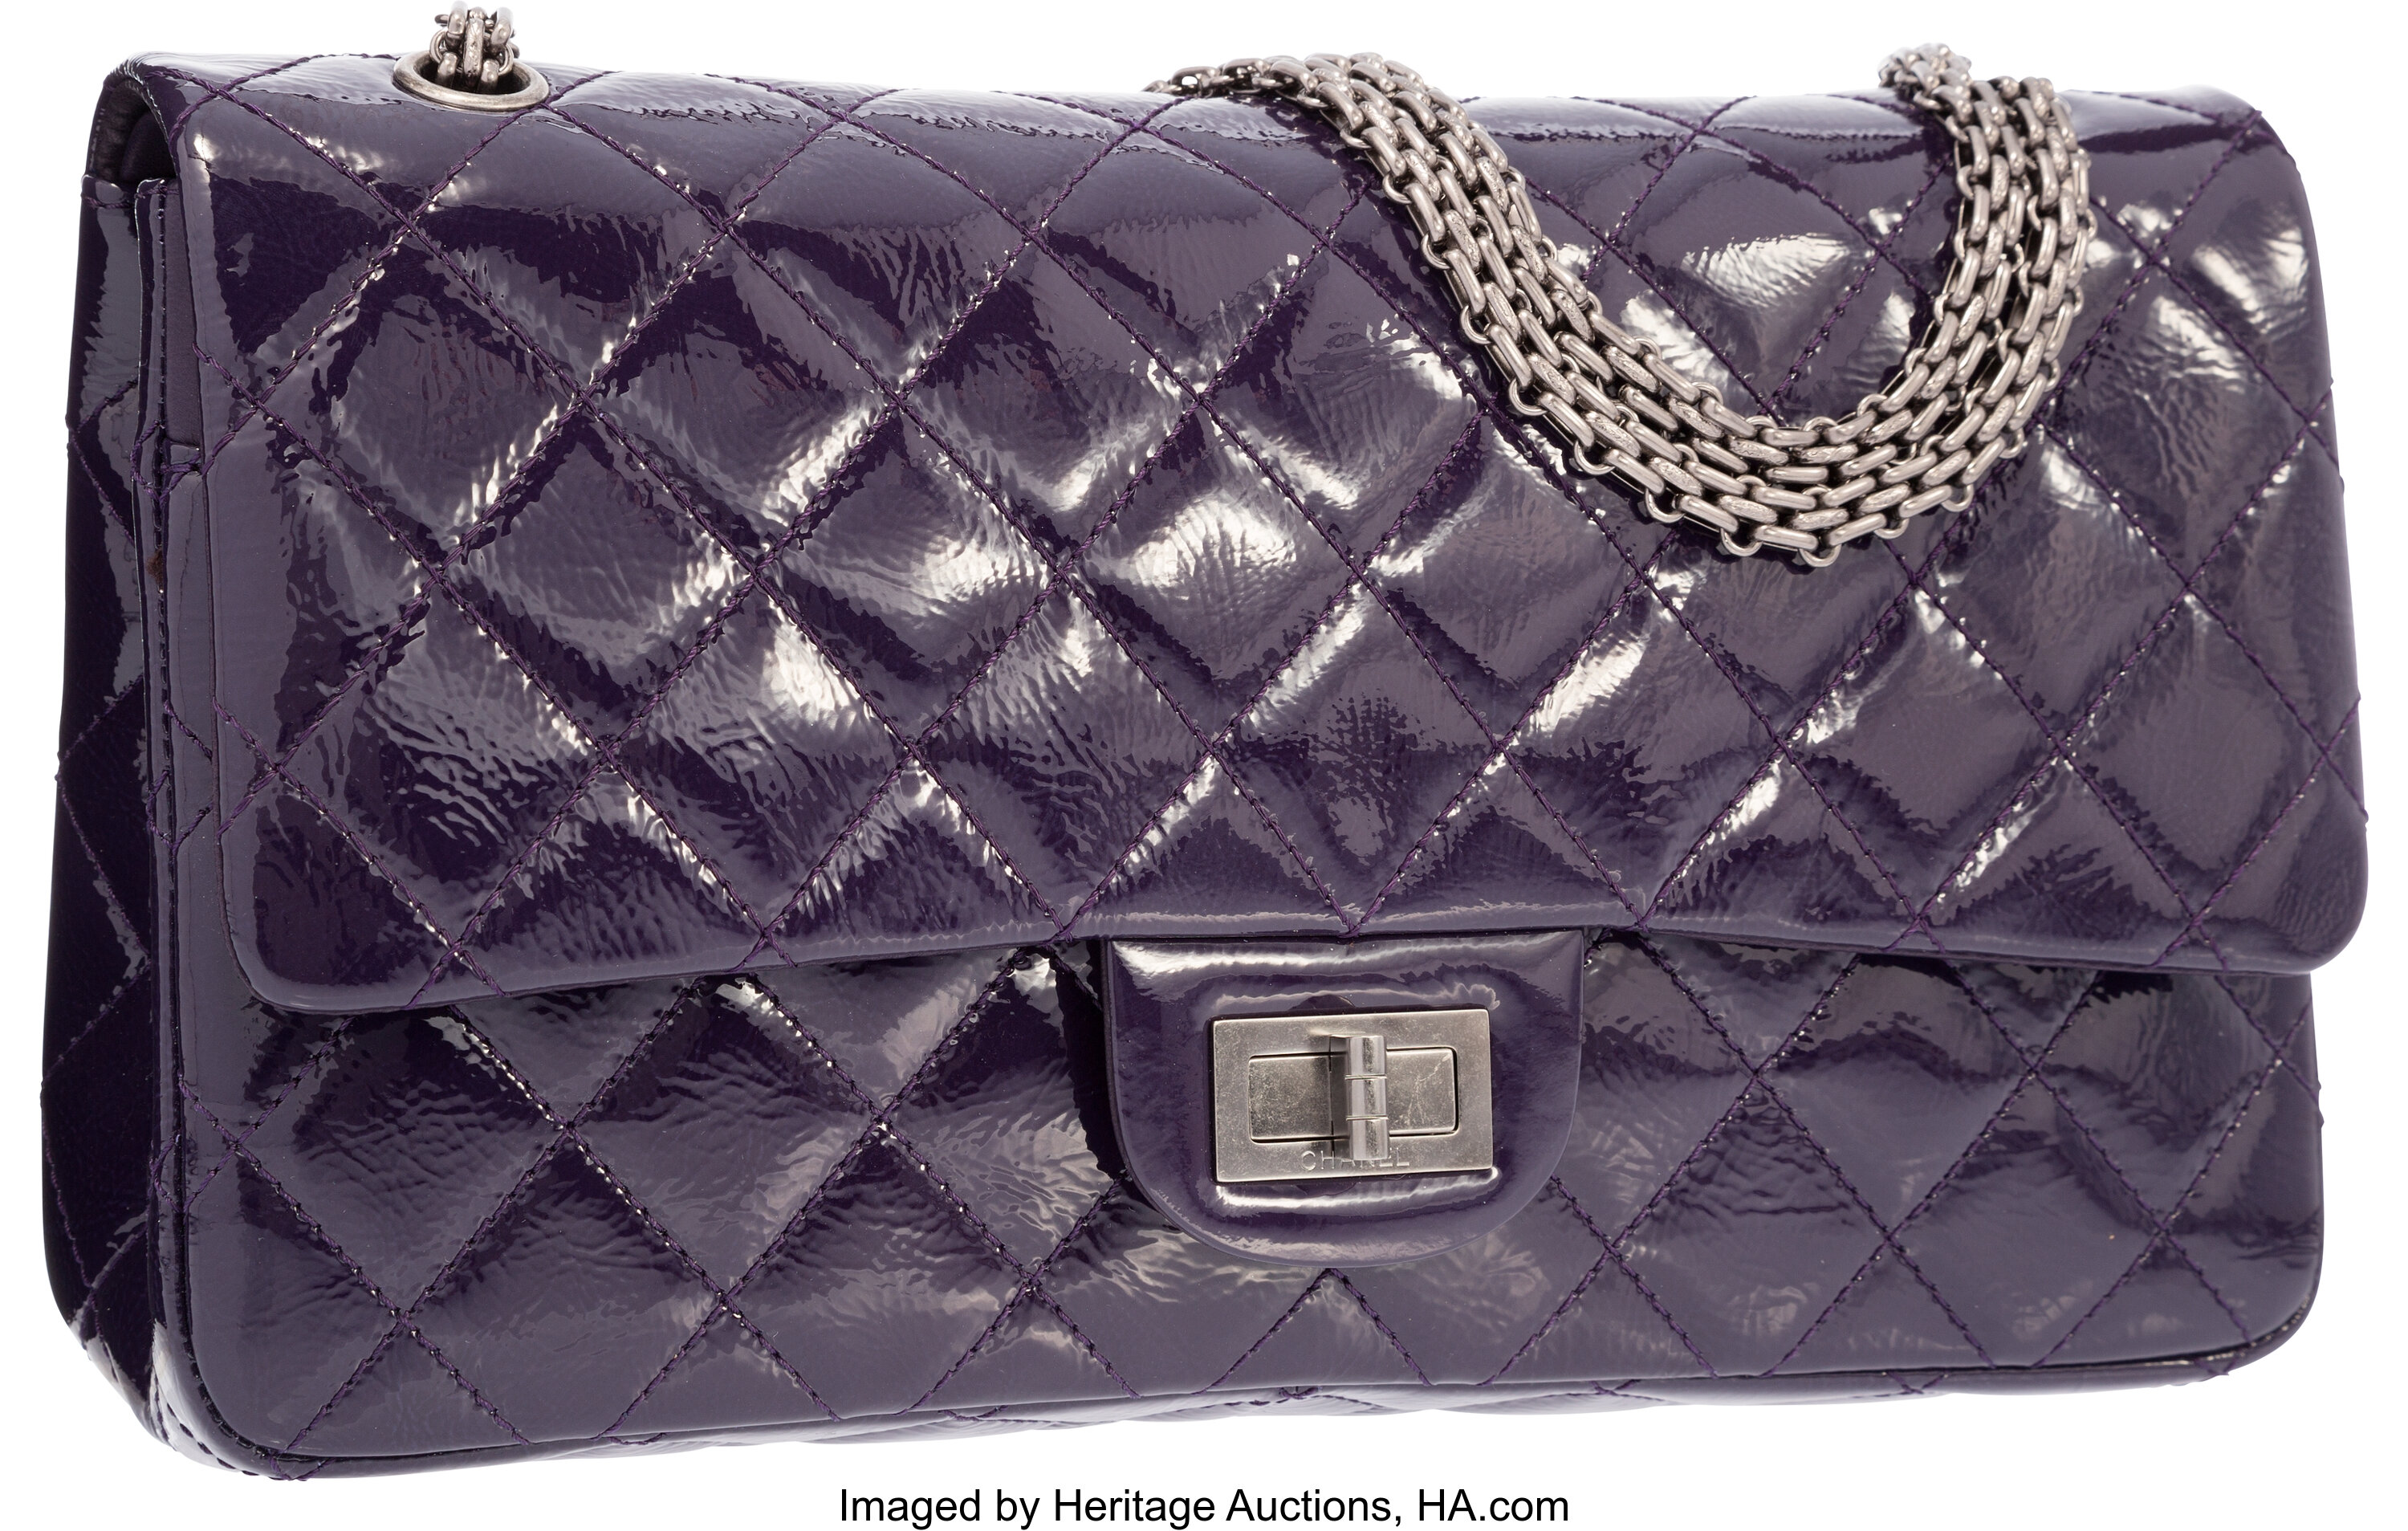 Chanel Metallic Gun Metal Quilted Leather Reissue 2.55 Camera Bag Chanel